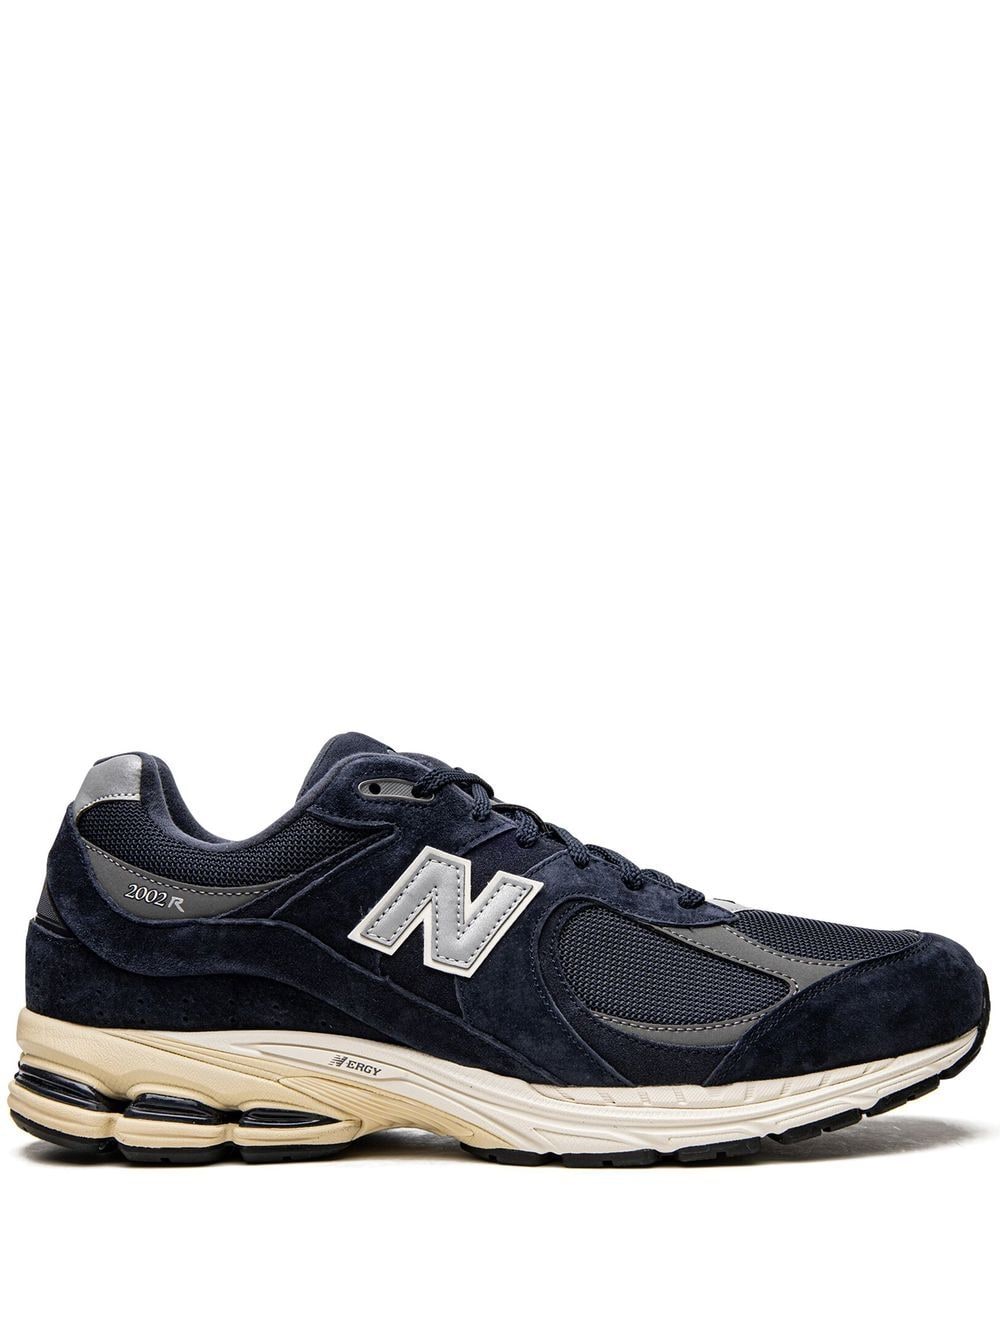 New Balance 2002R "Eclipse" sneakers - Blue